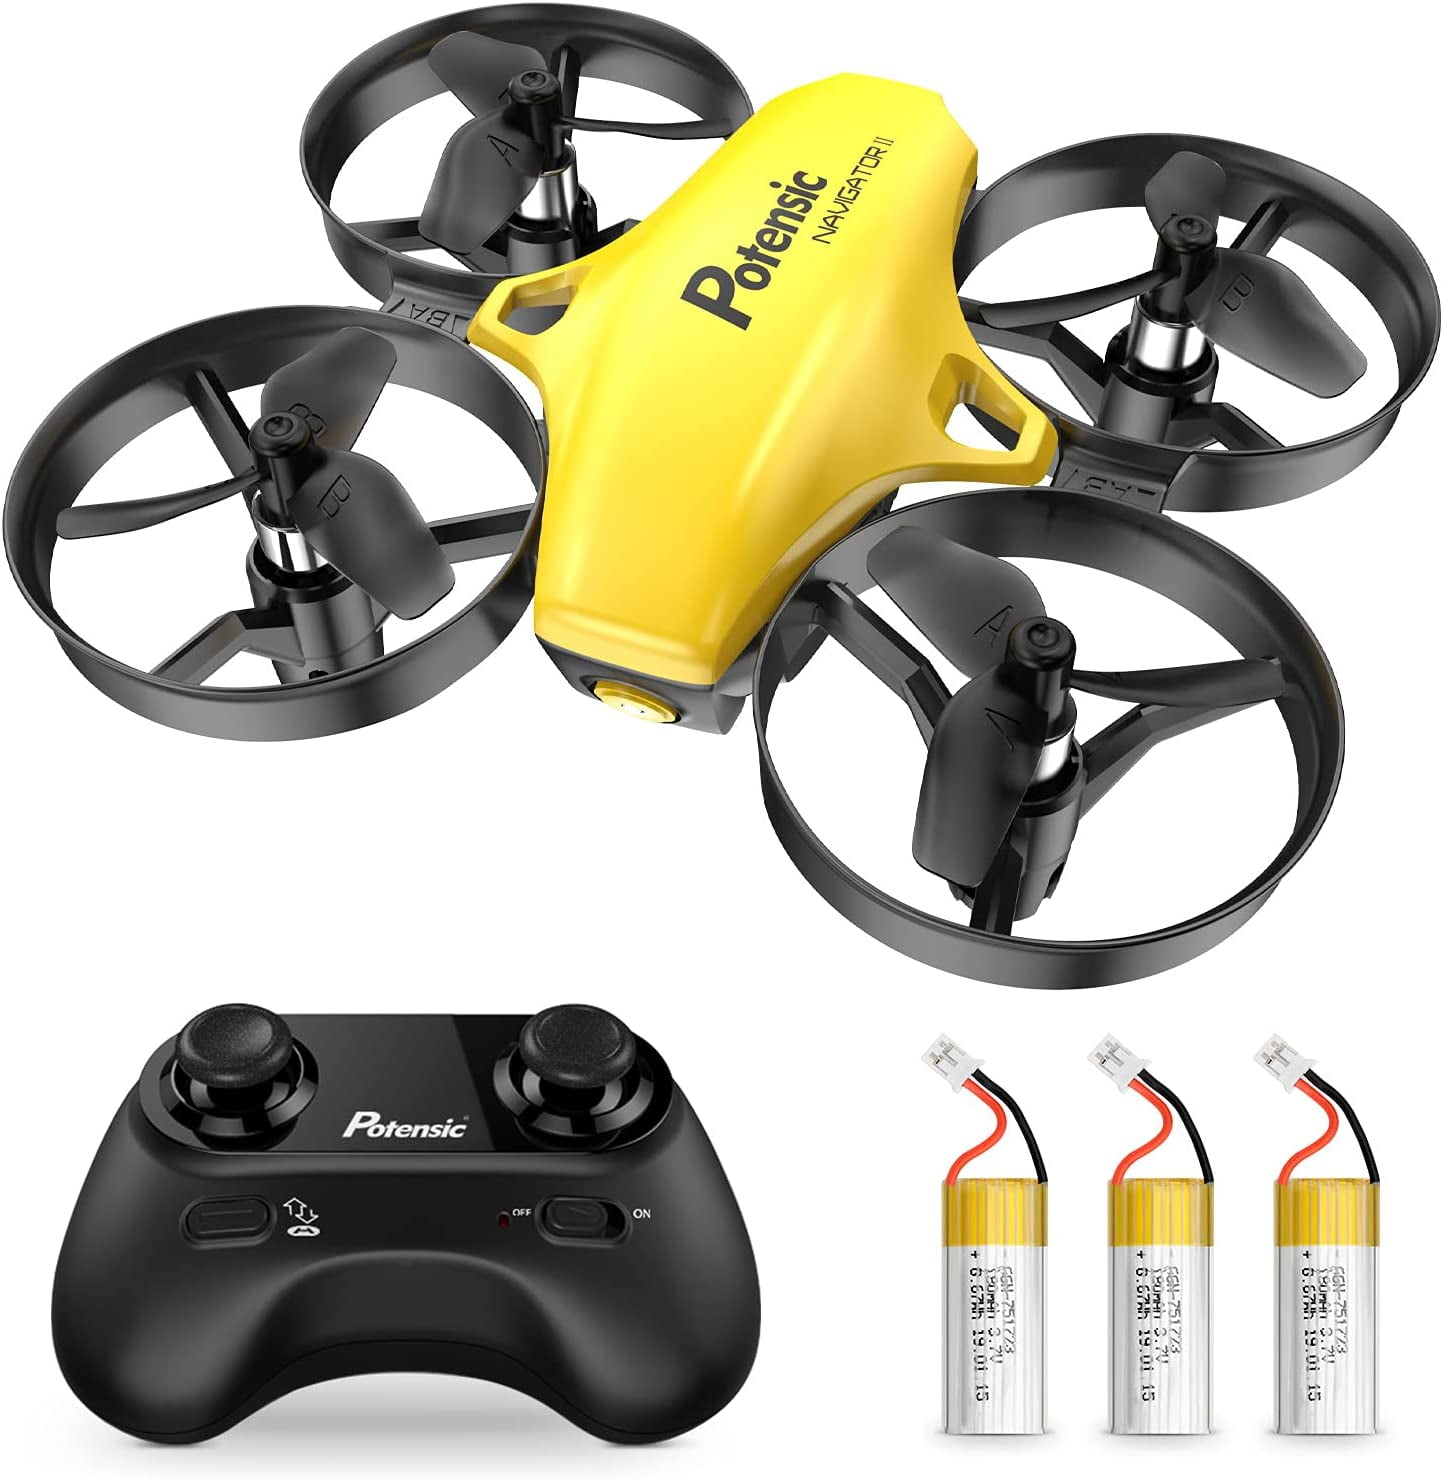 Potensic Upgraded A20 Mini Drone Easy to Fly Even to Kids and Beginners, RC  Helicopter Quadcopter with Auto Hovering, Headless Mode, 3 Batteries and  Remote Control, Gift Choice for Boys and Girls